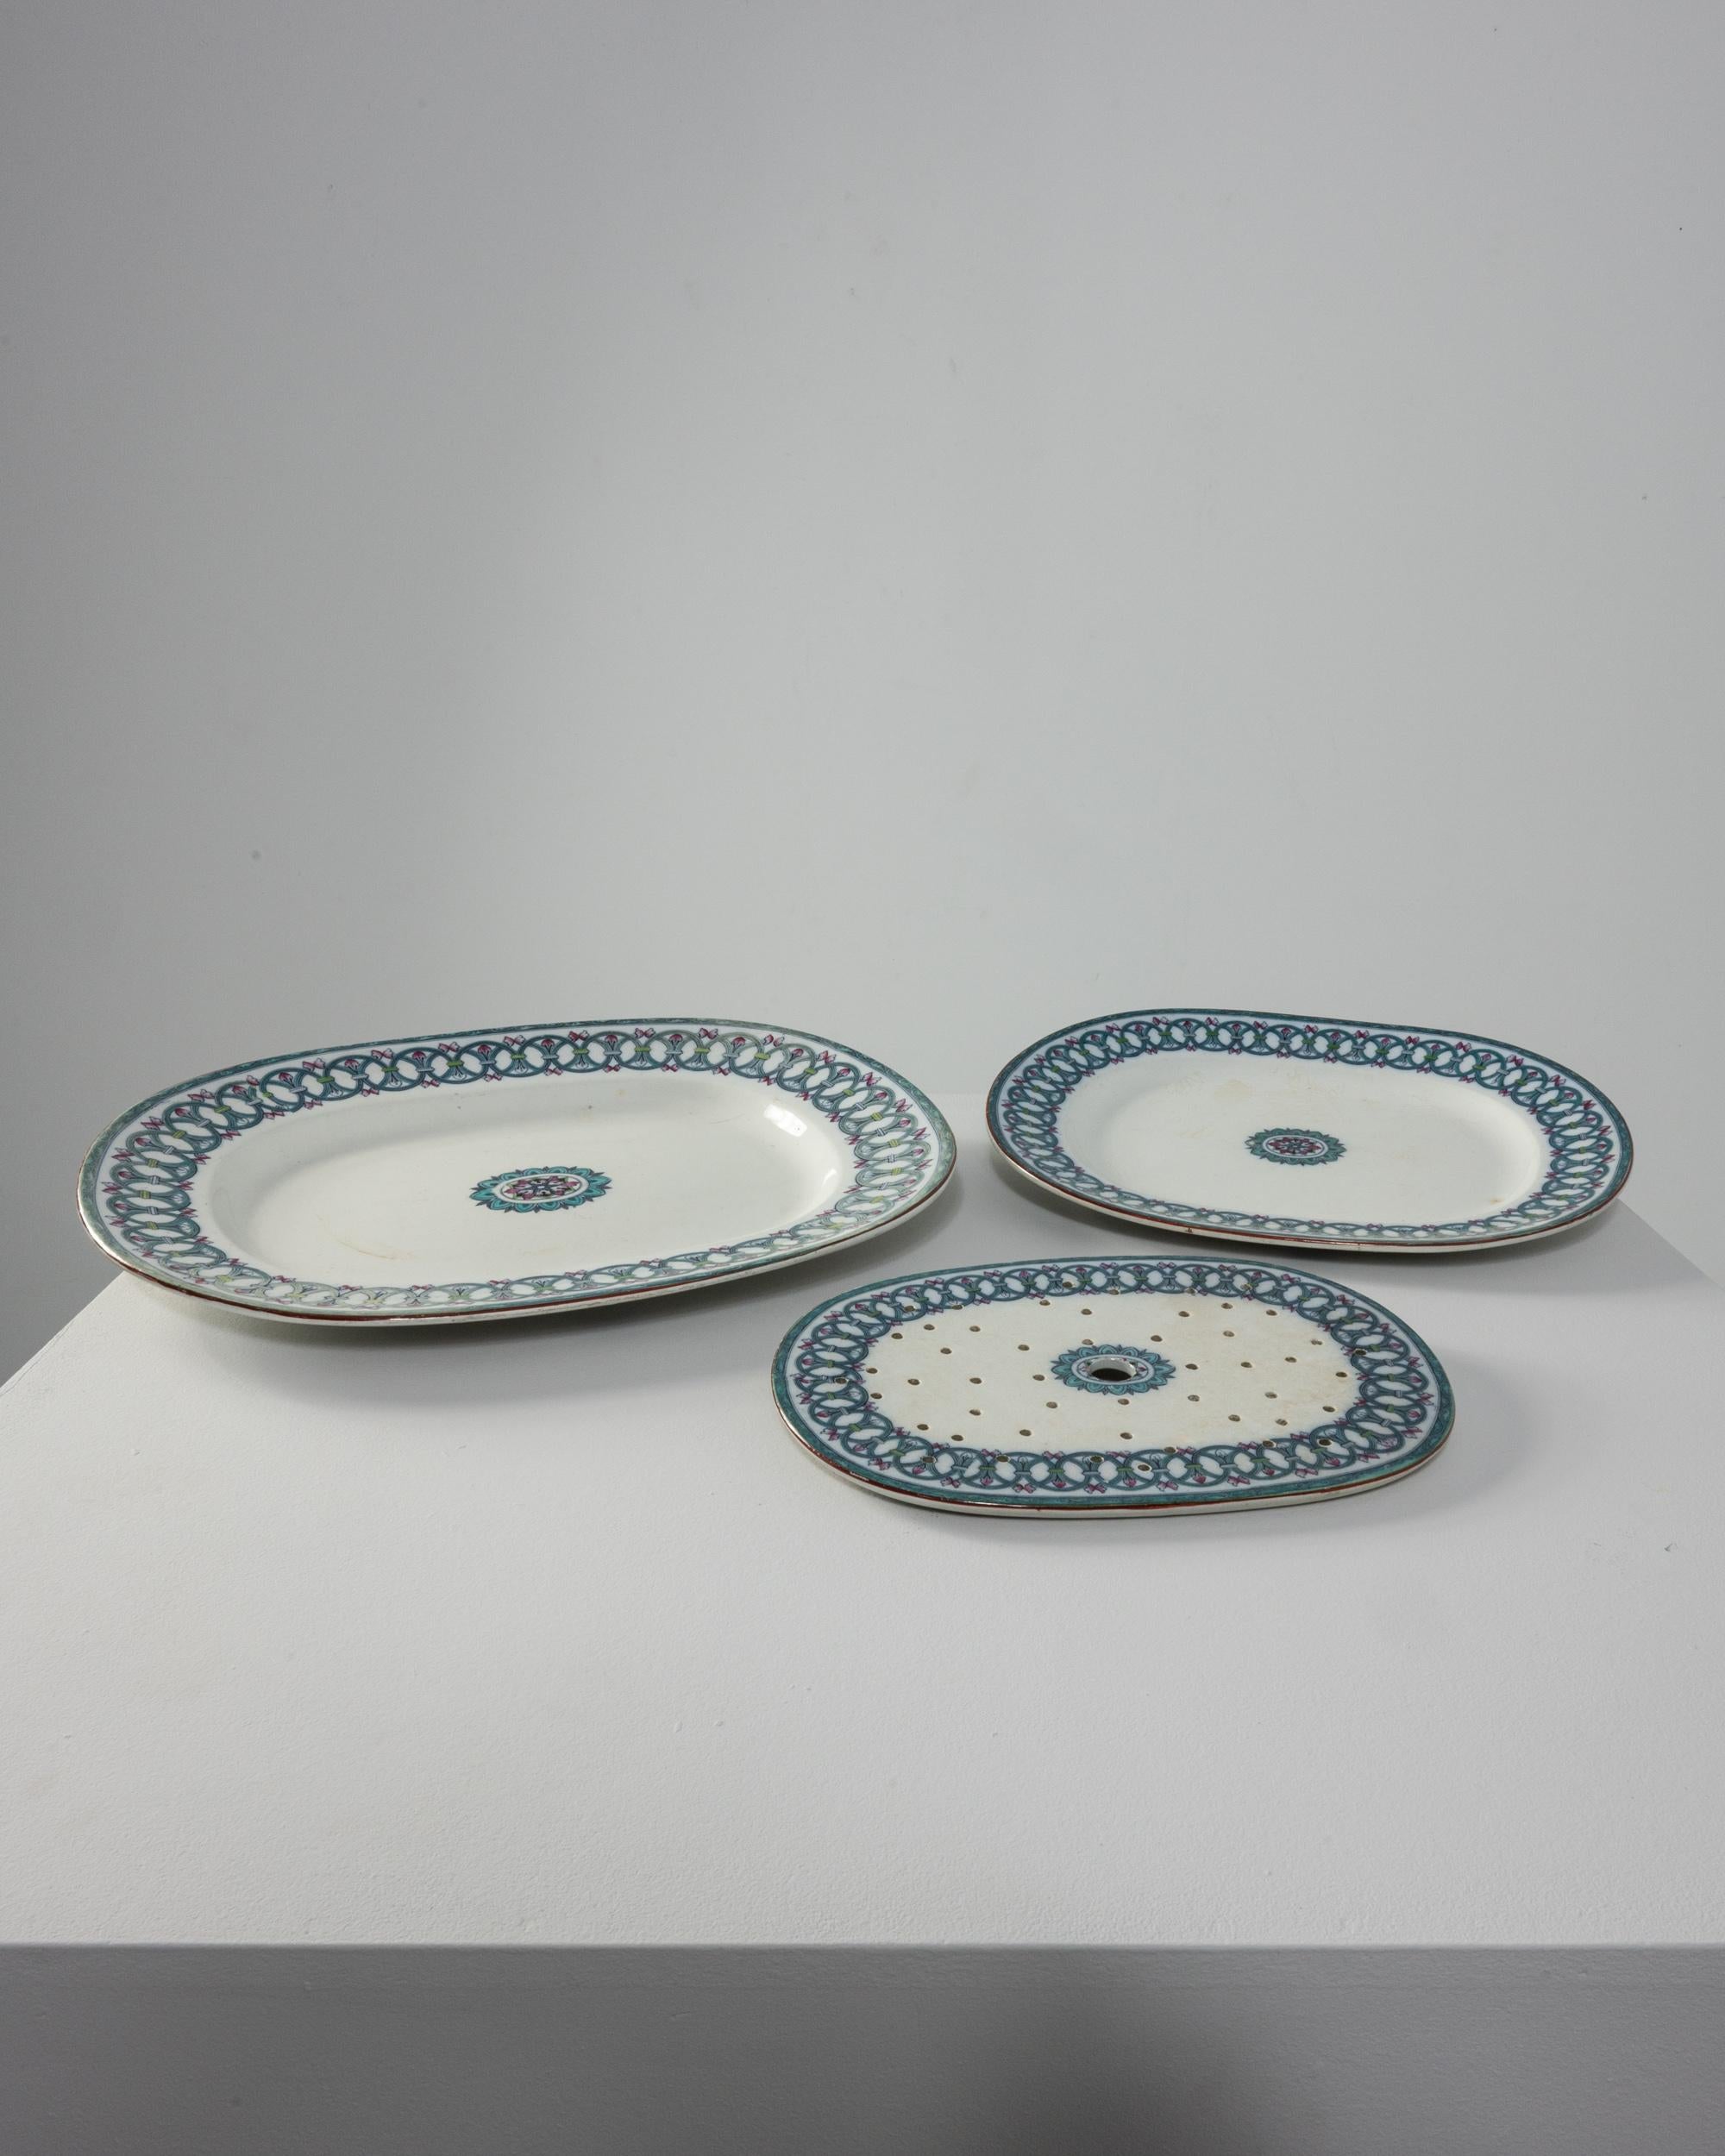 This elegant set of vintage ceramic plates includes two serving dishes and a perforated platter —a rare piece which was intended to collect the juices from a freshly cooked piece of meat as it was being served. Made in Britain in the 1920s, the